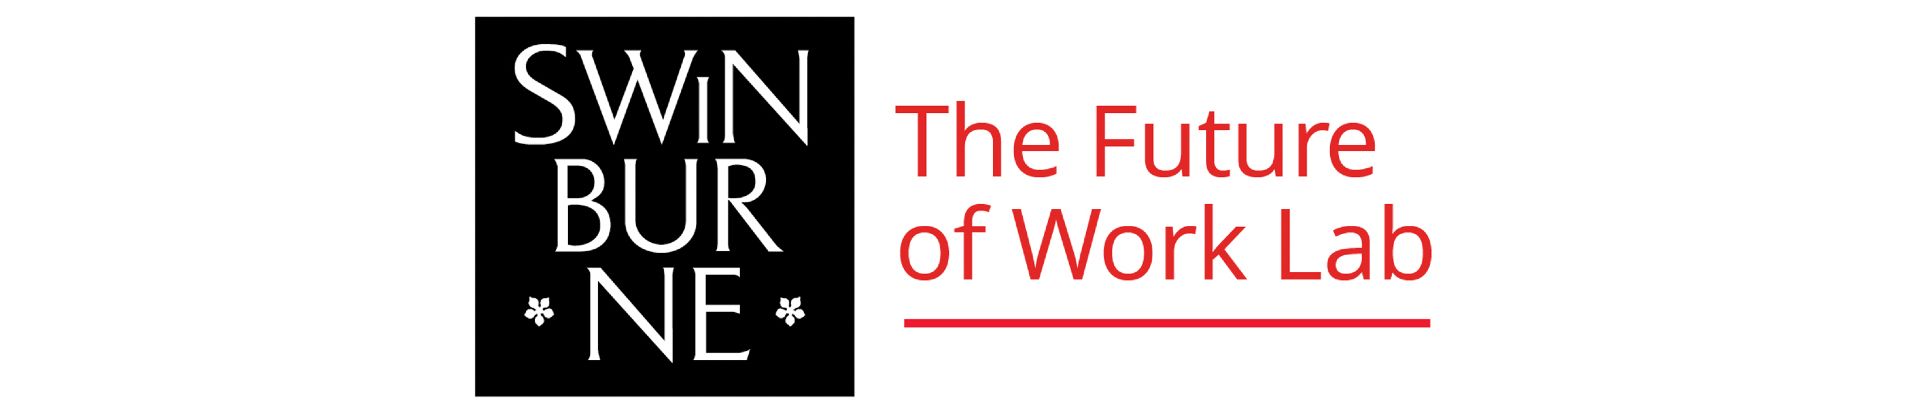 The Future of Work Lab logo